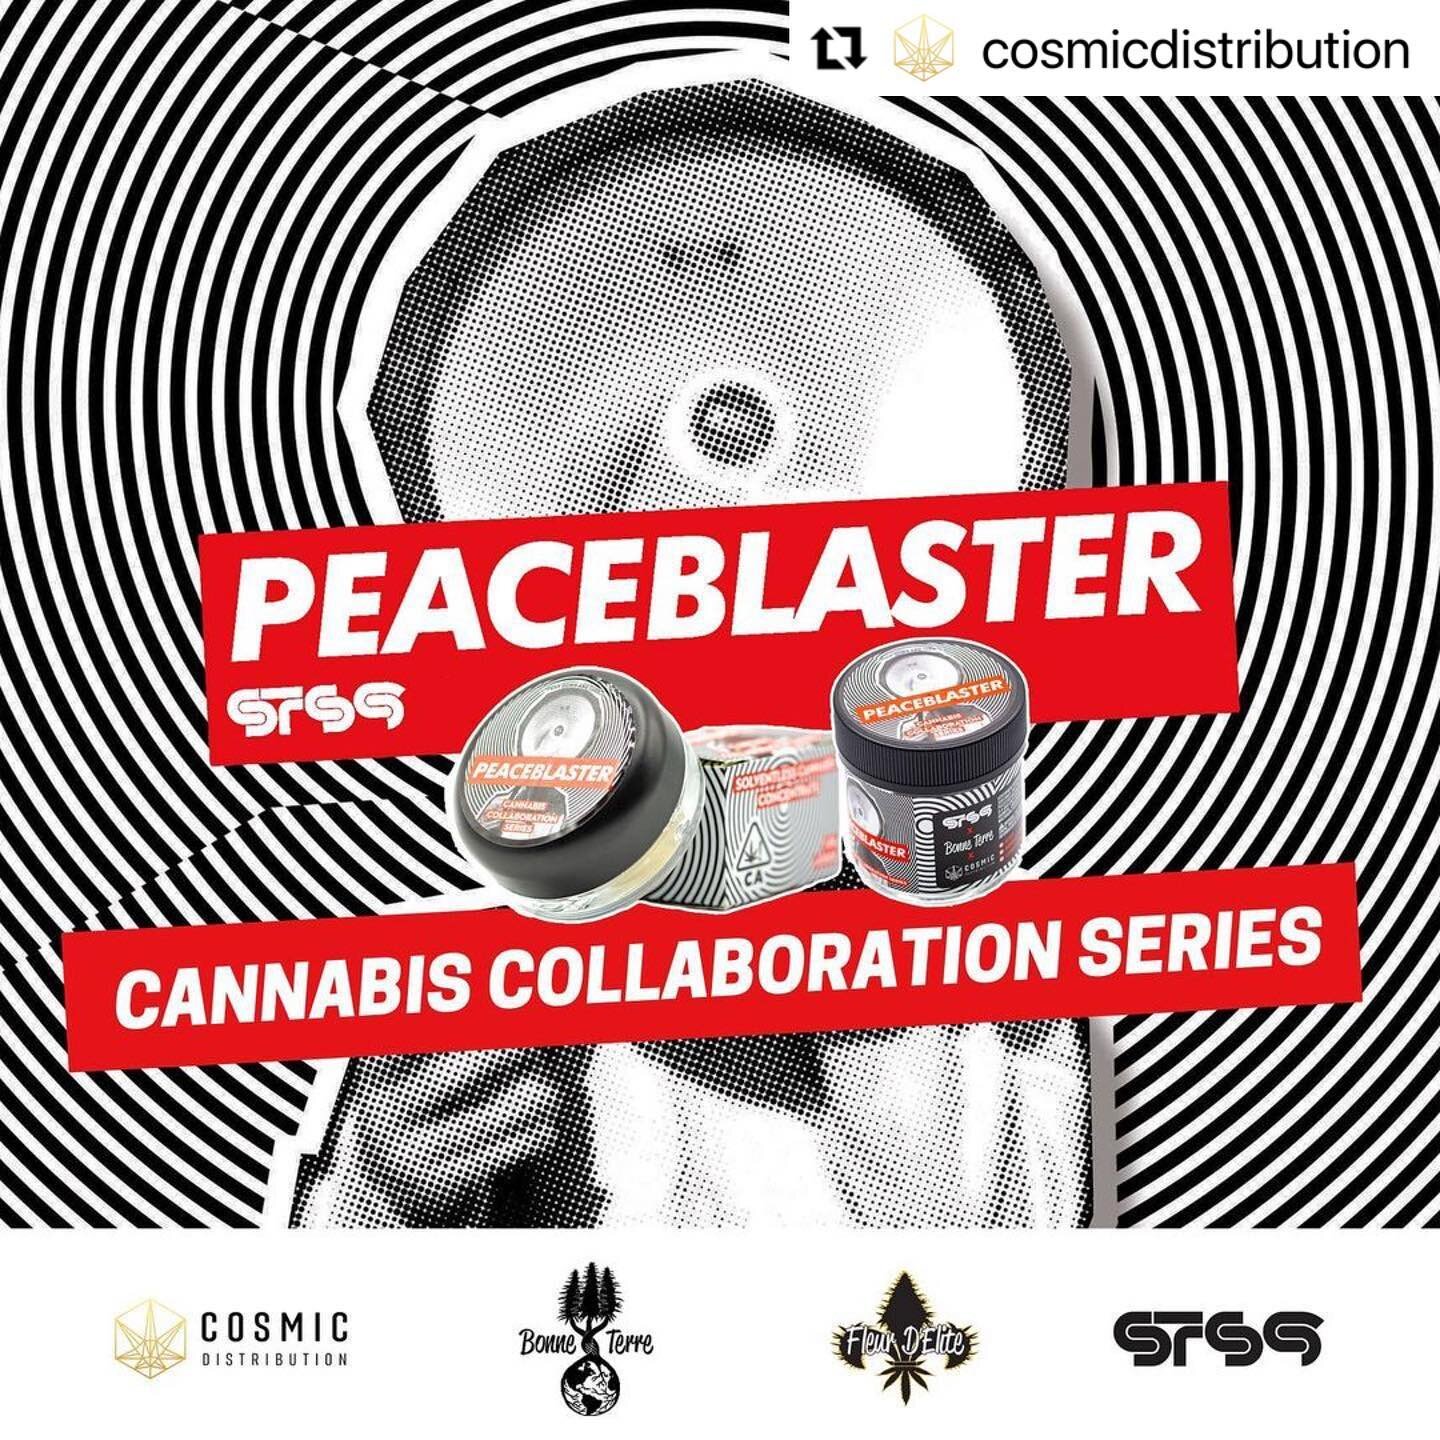 #Repost @cosmicdistribution 
・・・
Cosmic Distribution and Sound Tribe Sector Nine (@sts9) are proud to announce a new line of cannabis collaborations inspired by the classic STS9 album, Peaceblaster.

This ongoing line of collaborative products will b